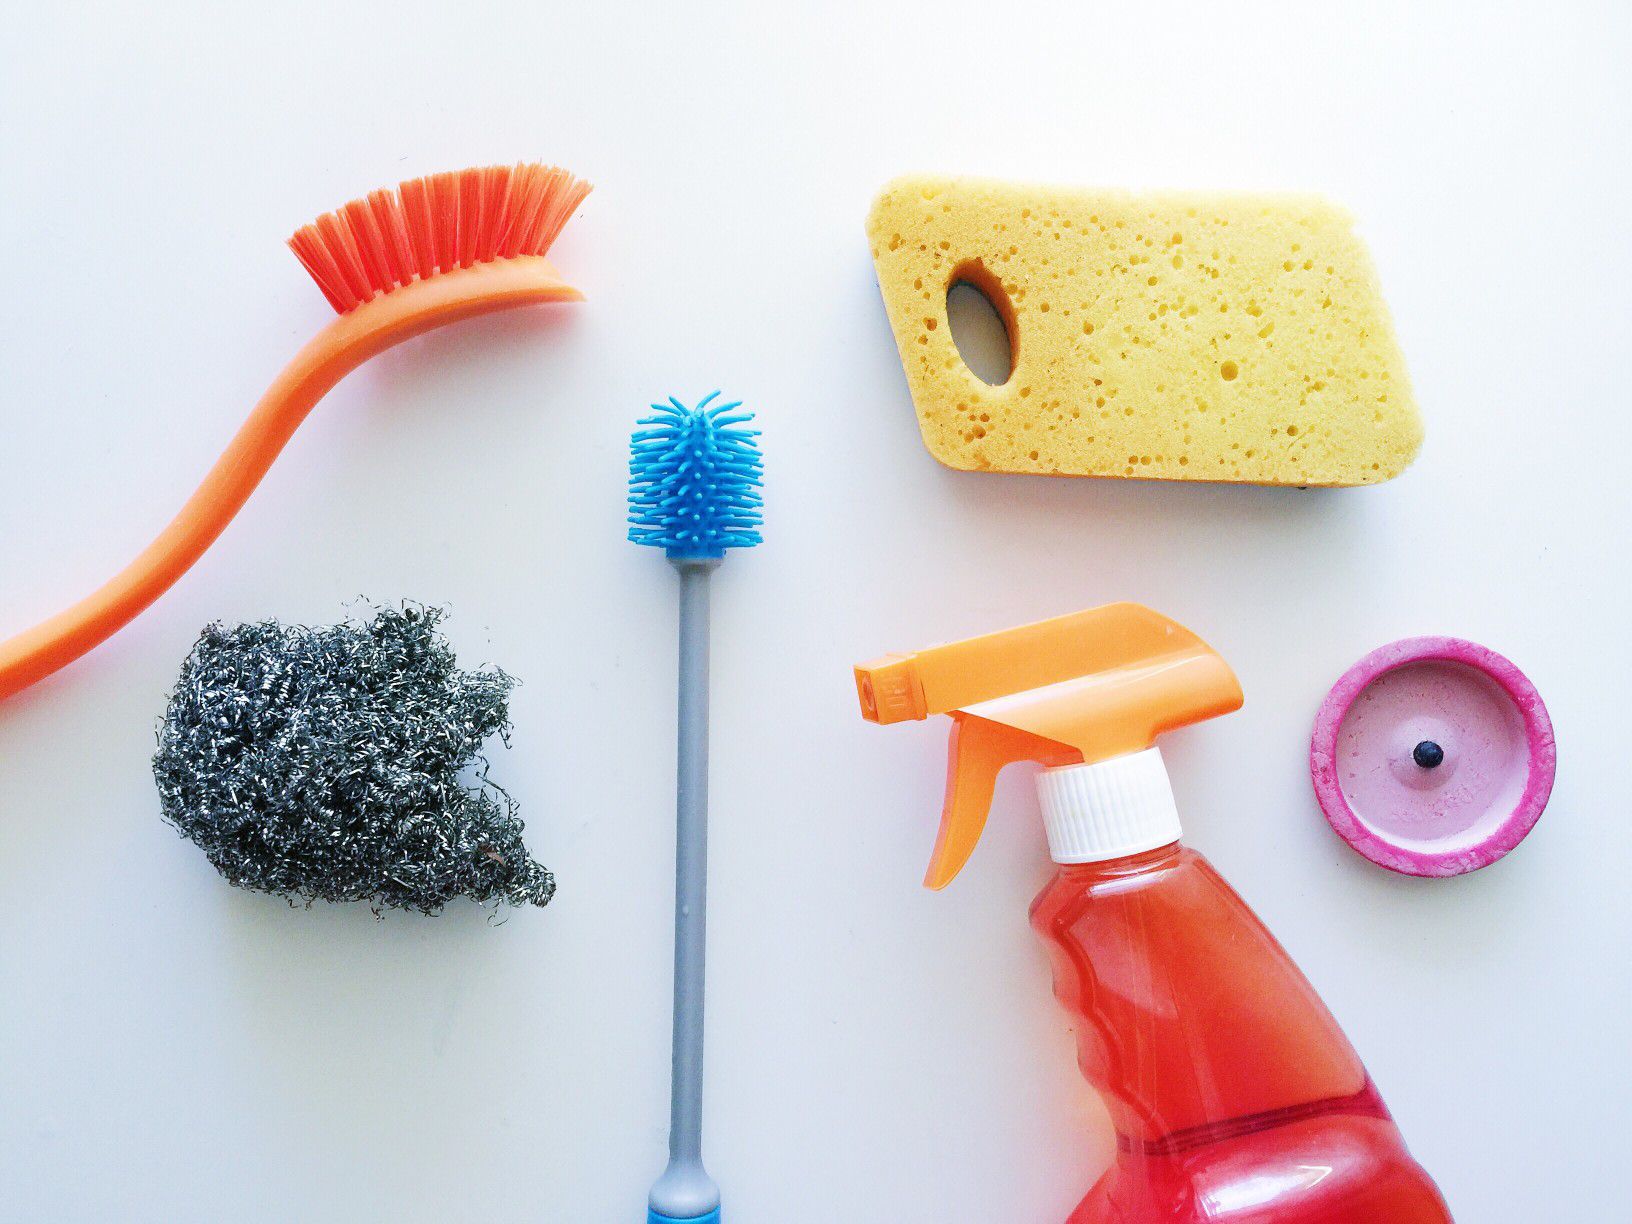 10 Speed-Cleaning Tips to Get the Job Done Faster